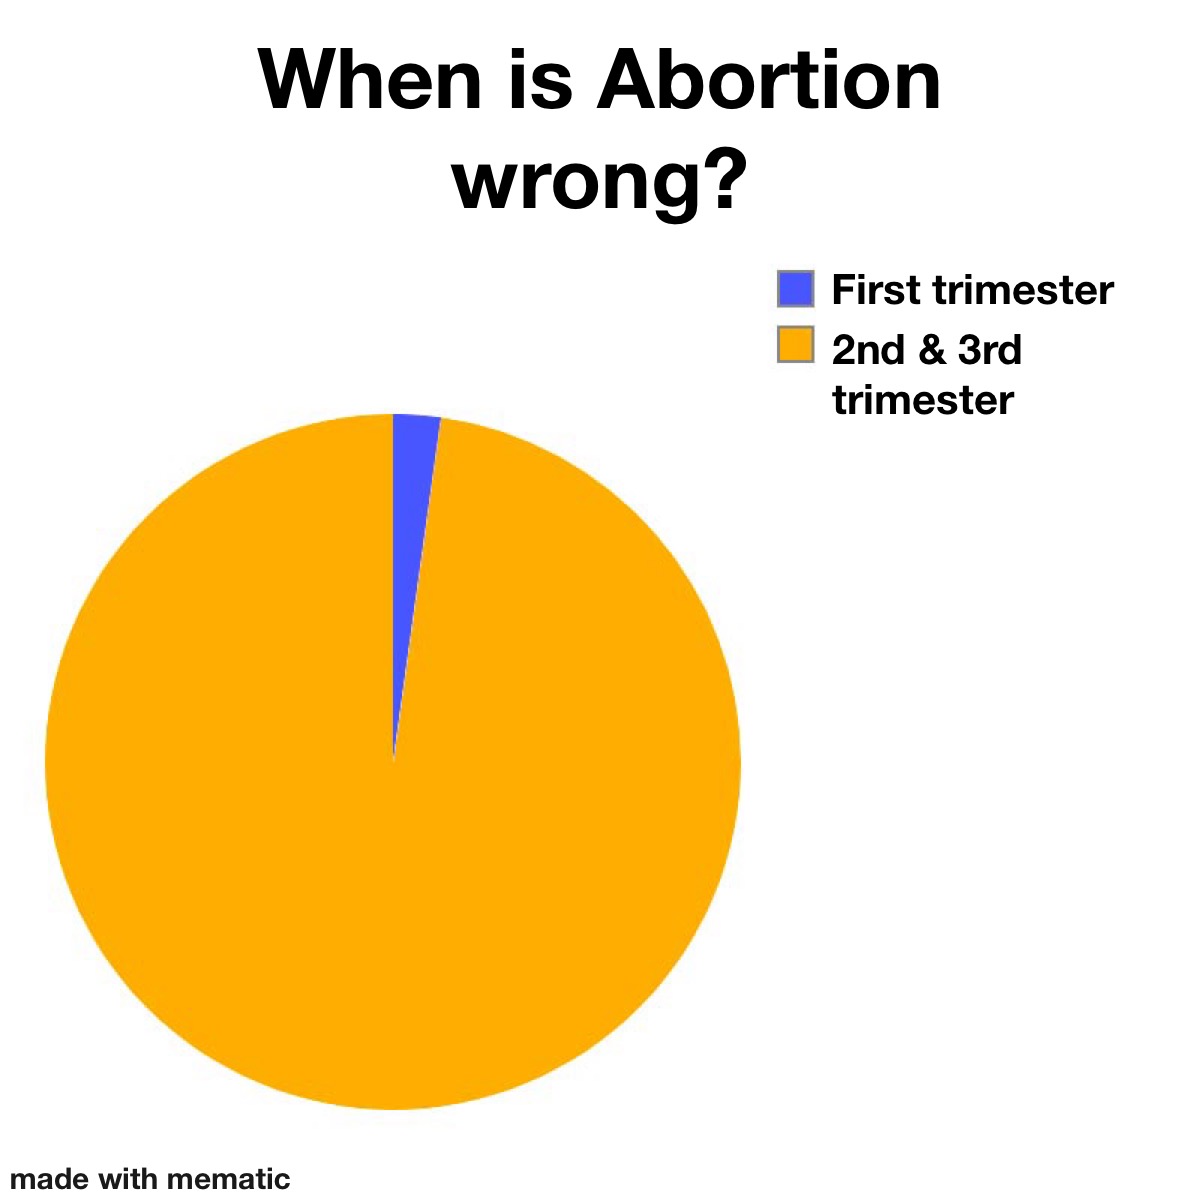 When Is Abortion Wrong Pie Chart